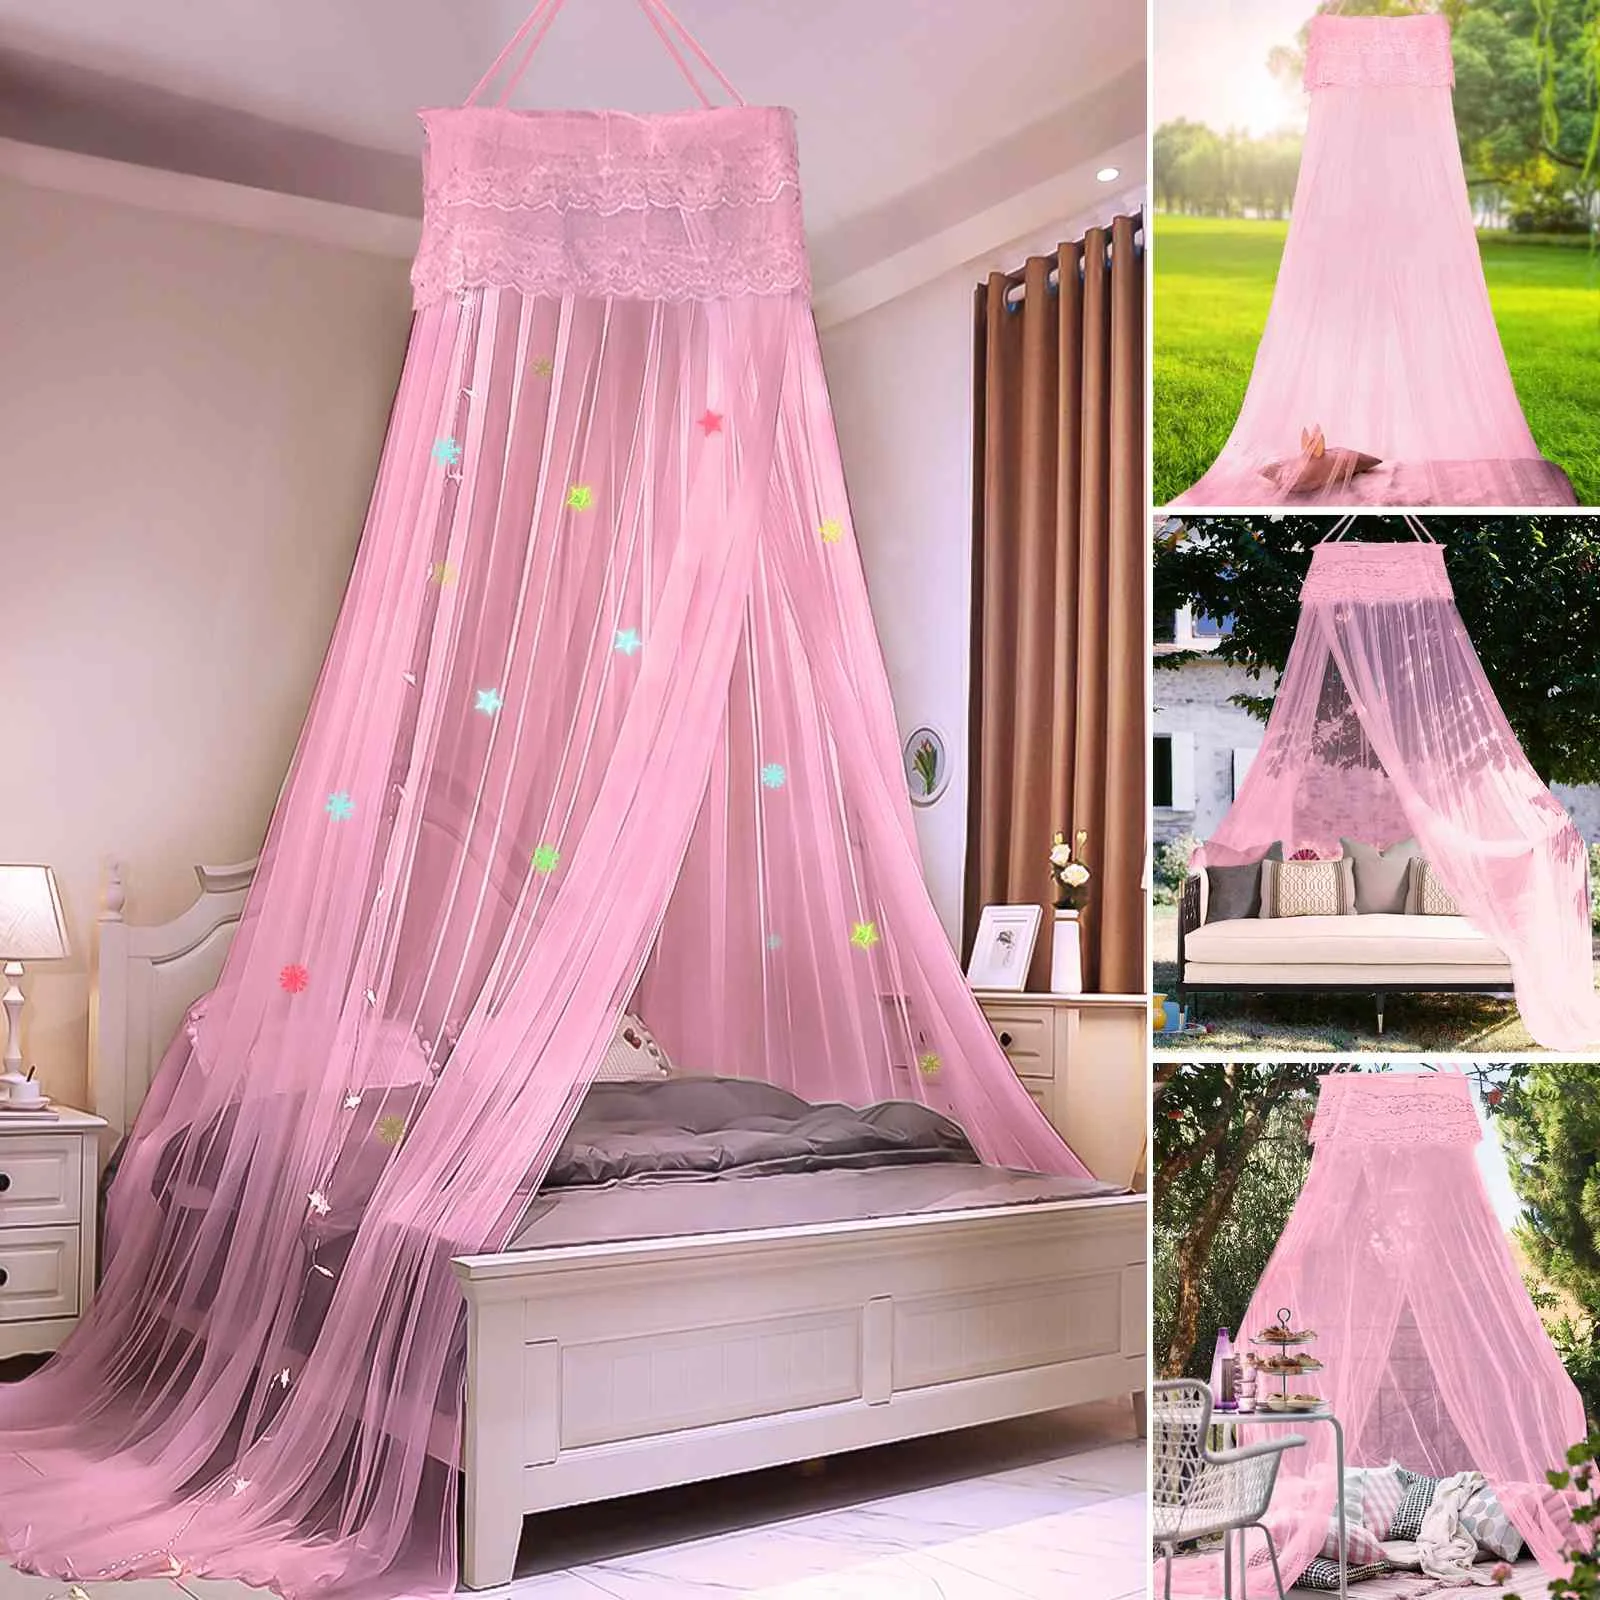 White Lace Bed Mosquito Netting Mesh Canopy Princess Round Dome Bedding Netting 